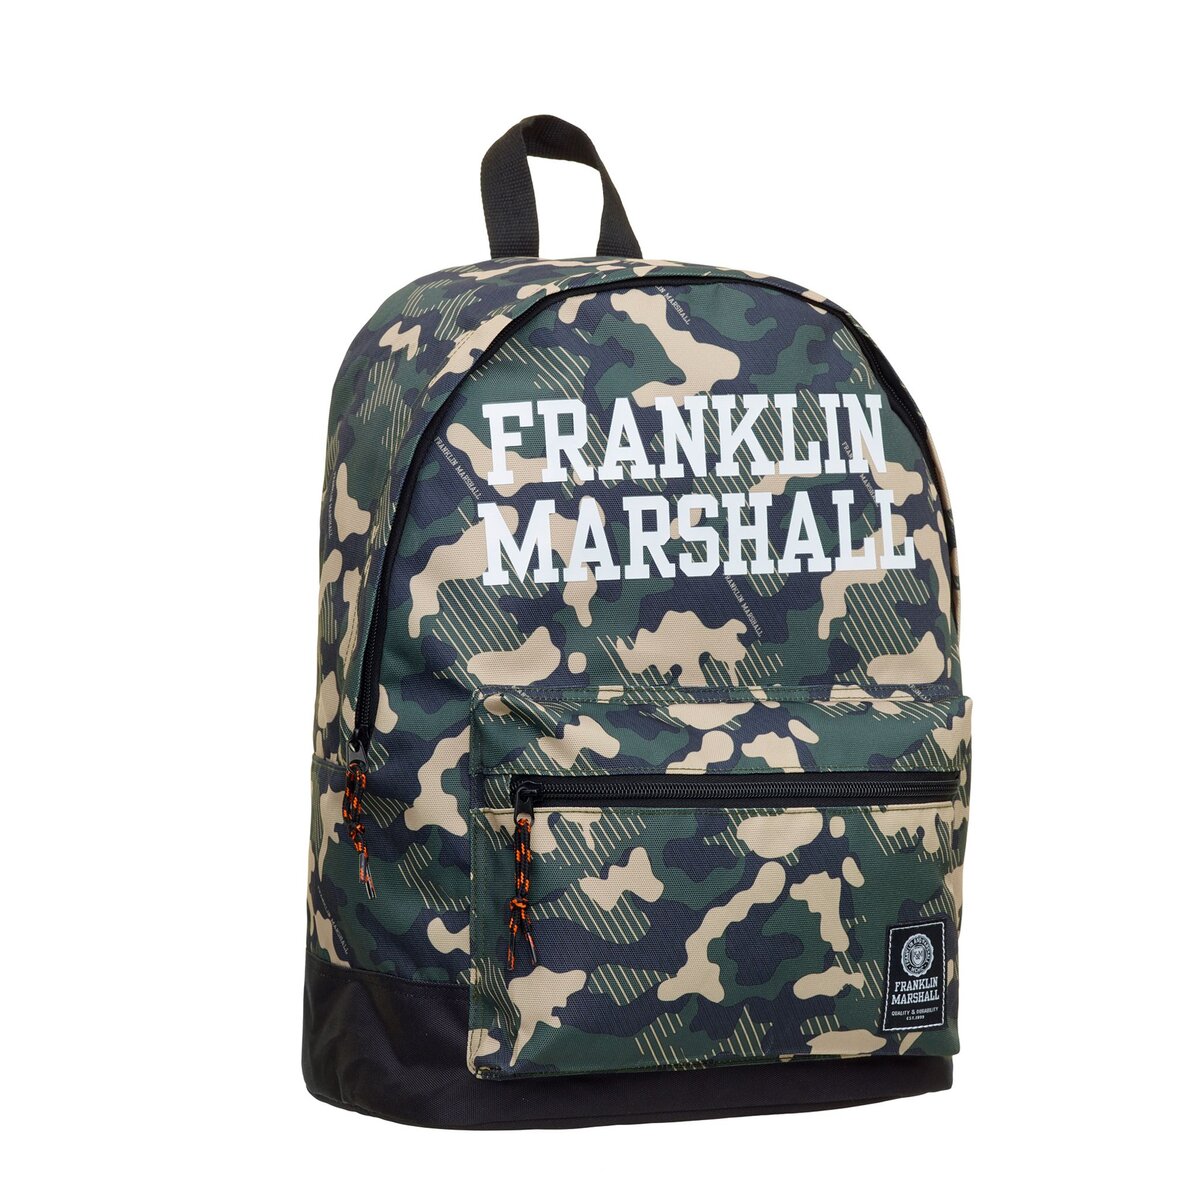 FRANKLIN AND MARSHALL Sac à dos 1 compartiment noir motif camouflage